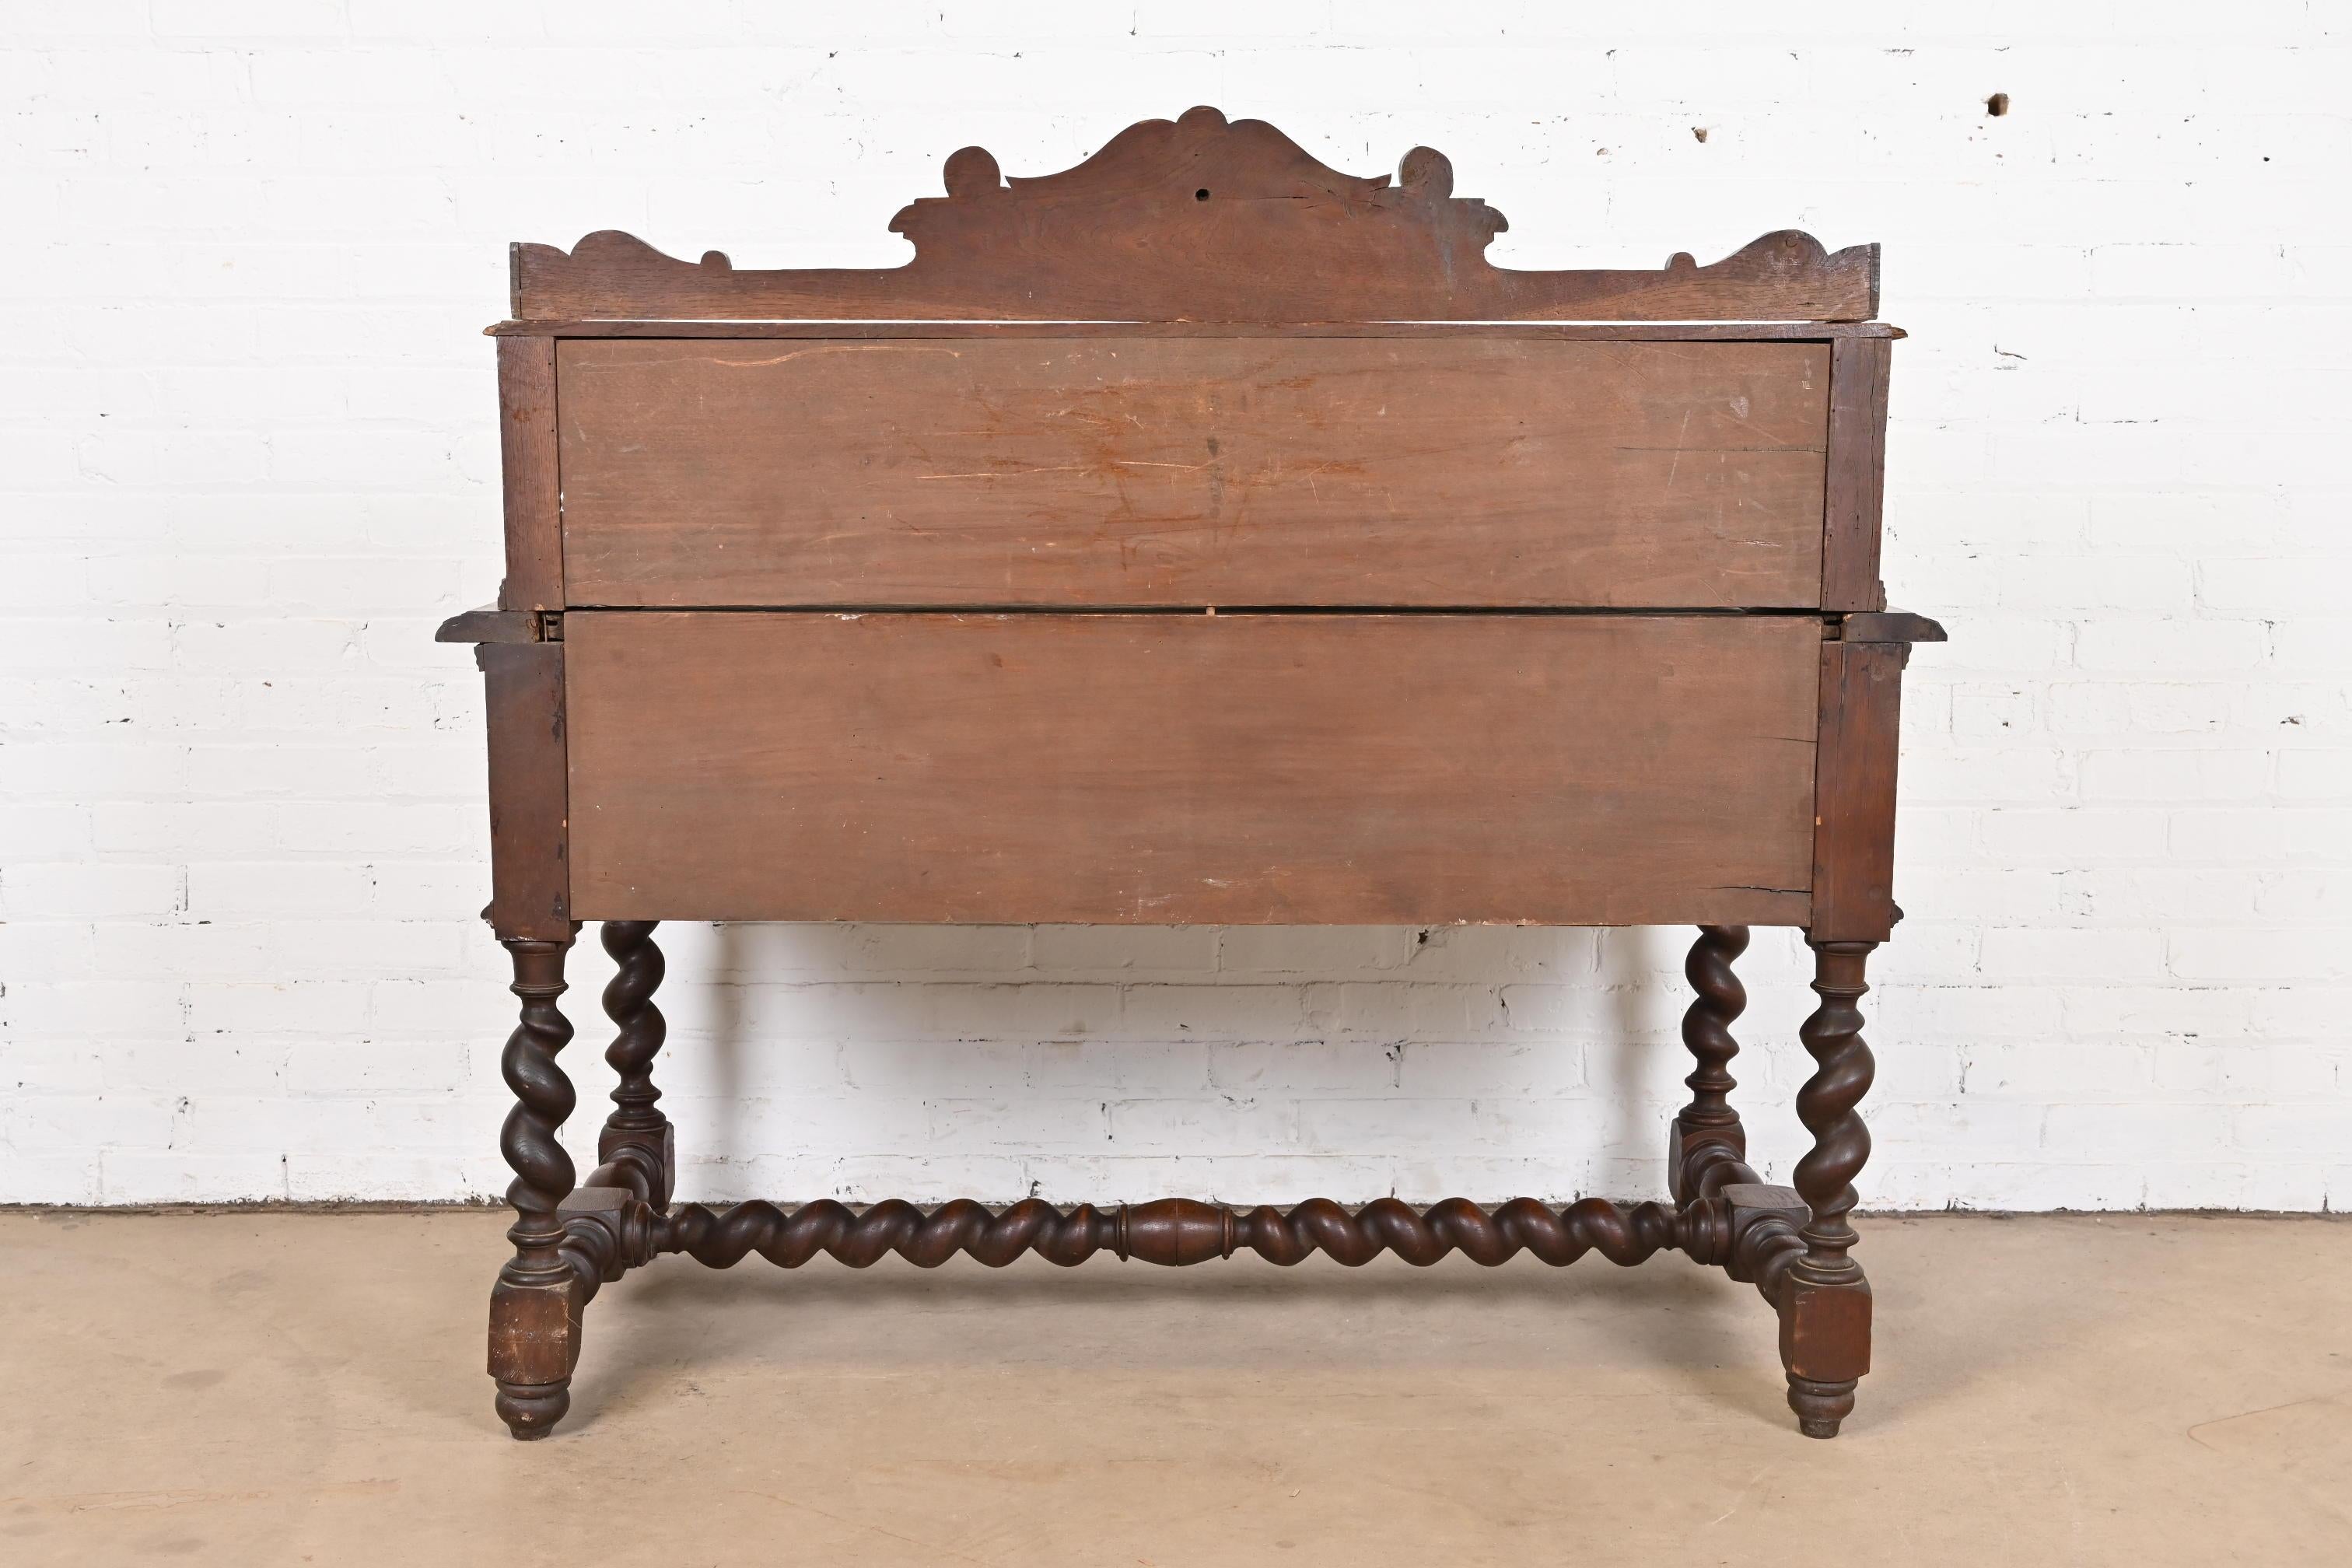 19th Century French Black Forest Carved Oak Writing Desk With Barley Twist Legs For Sale 13